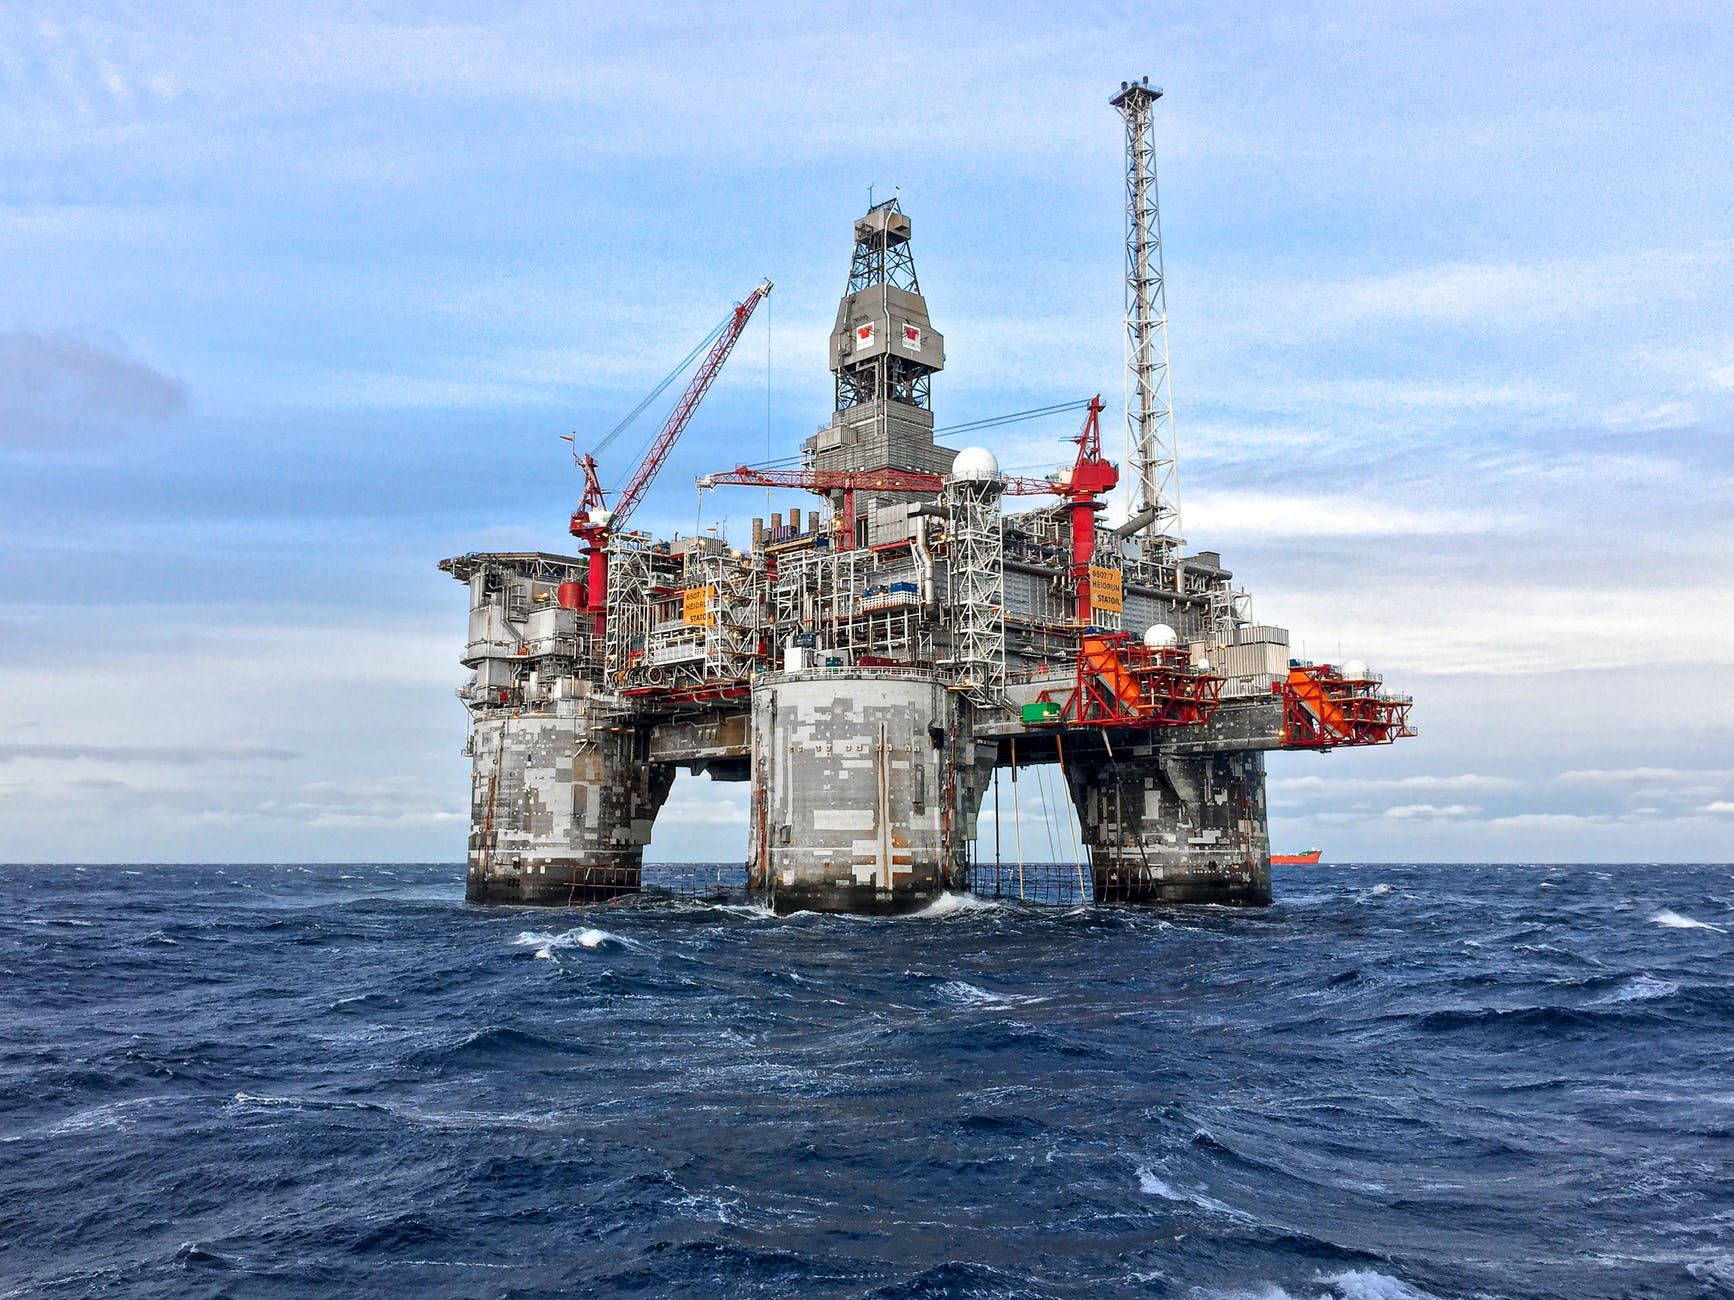 Water for off-shore oil and gas projects inMechanical Systems